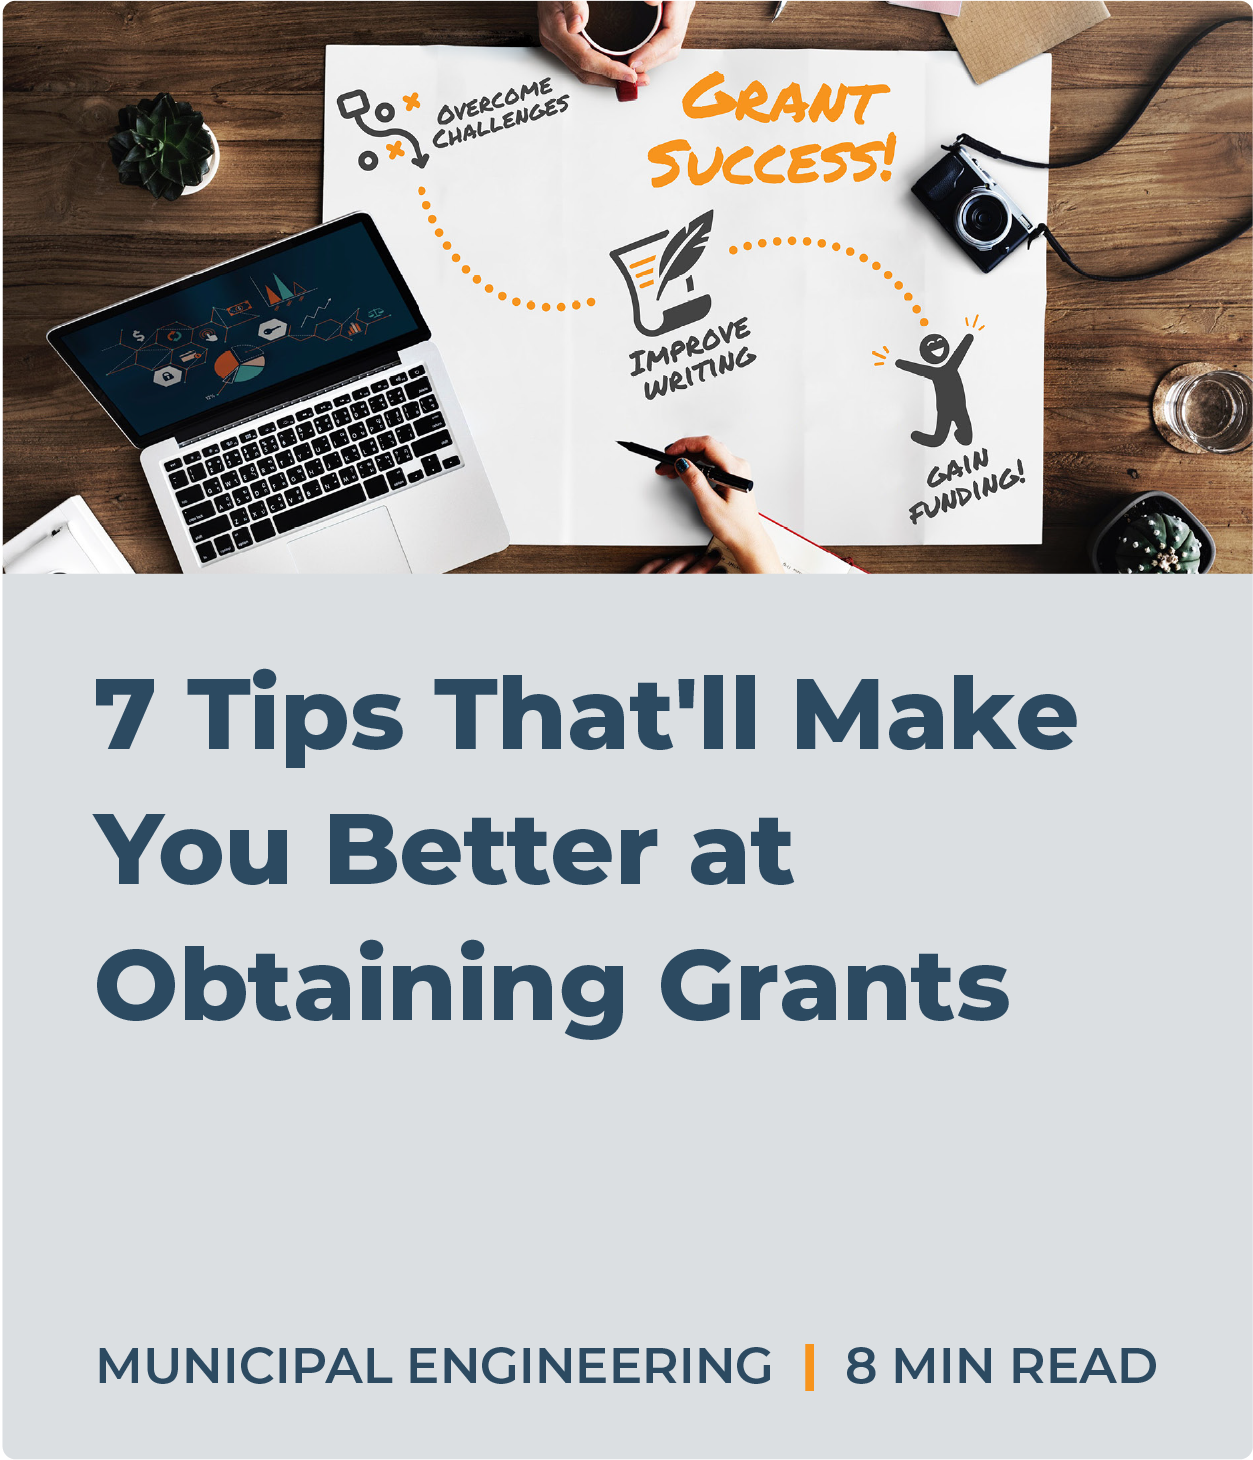 7 Tips That'll Make You Better at Obtaining Grants